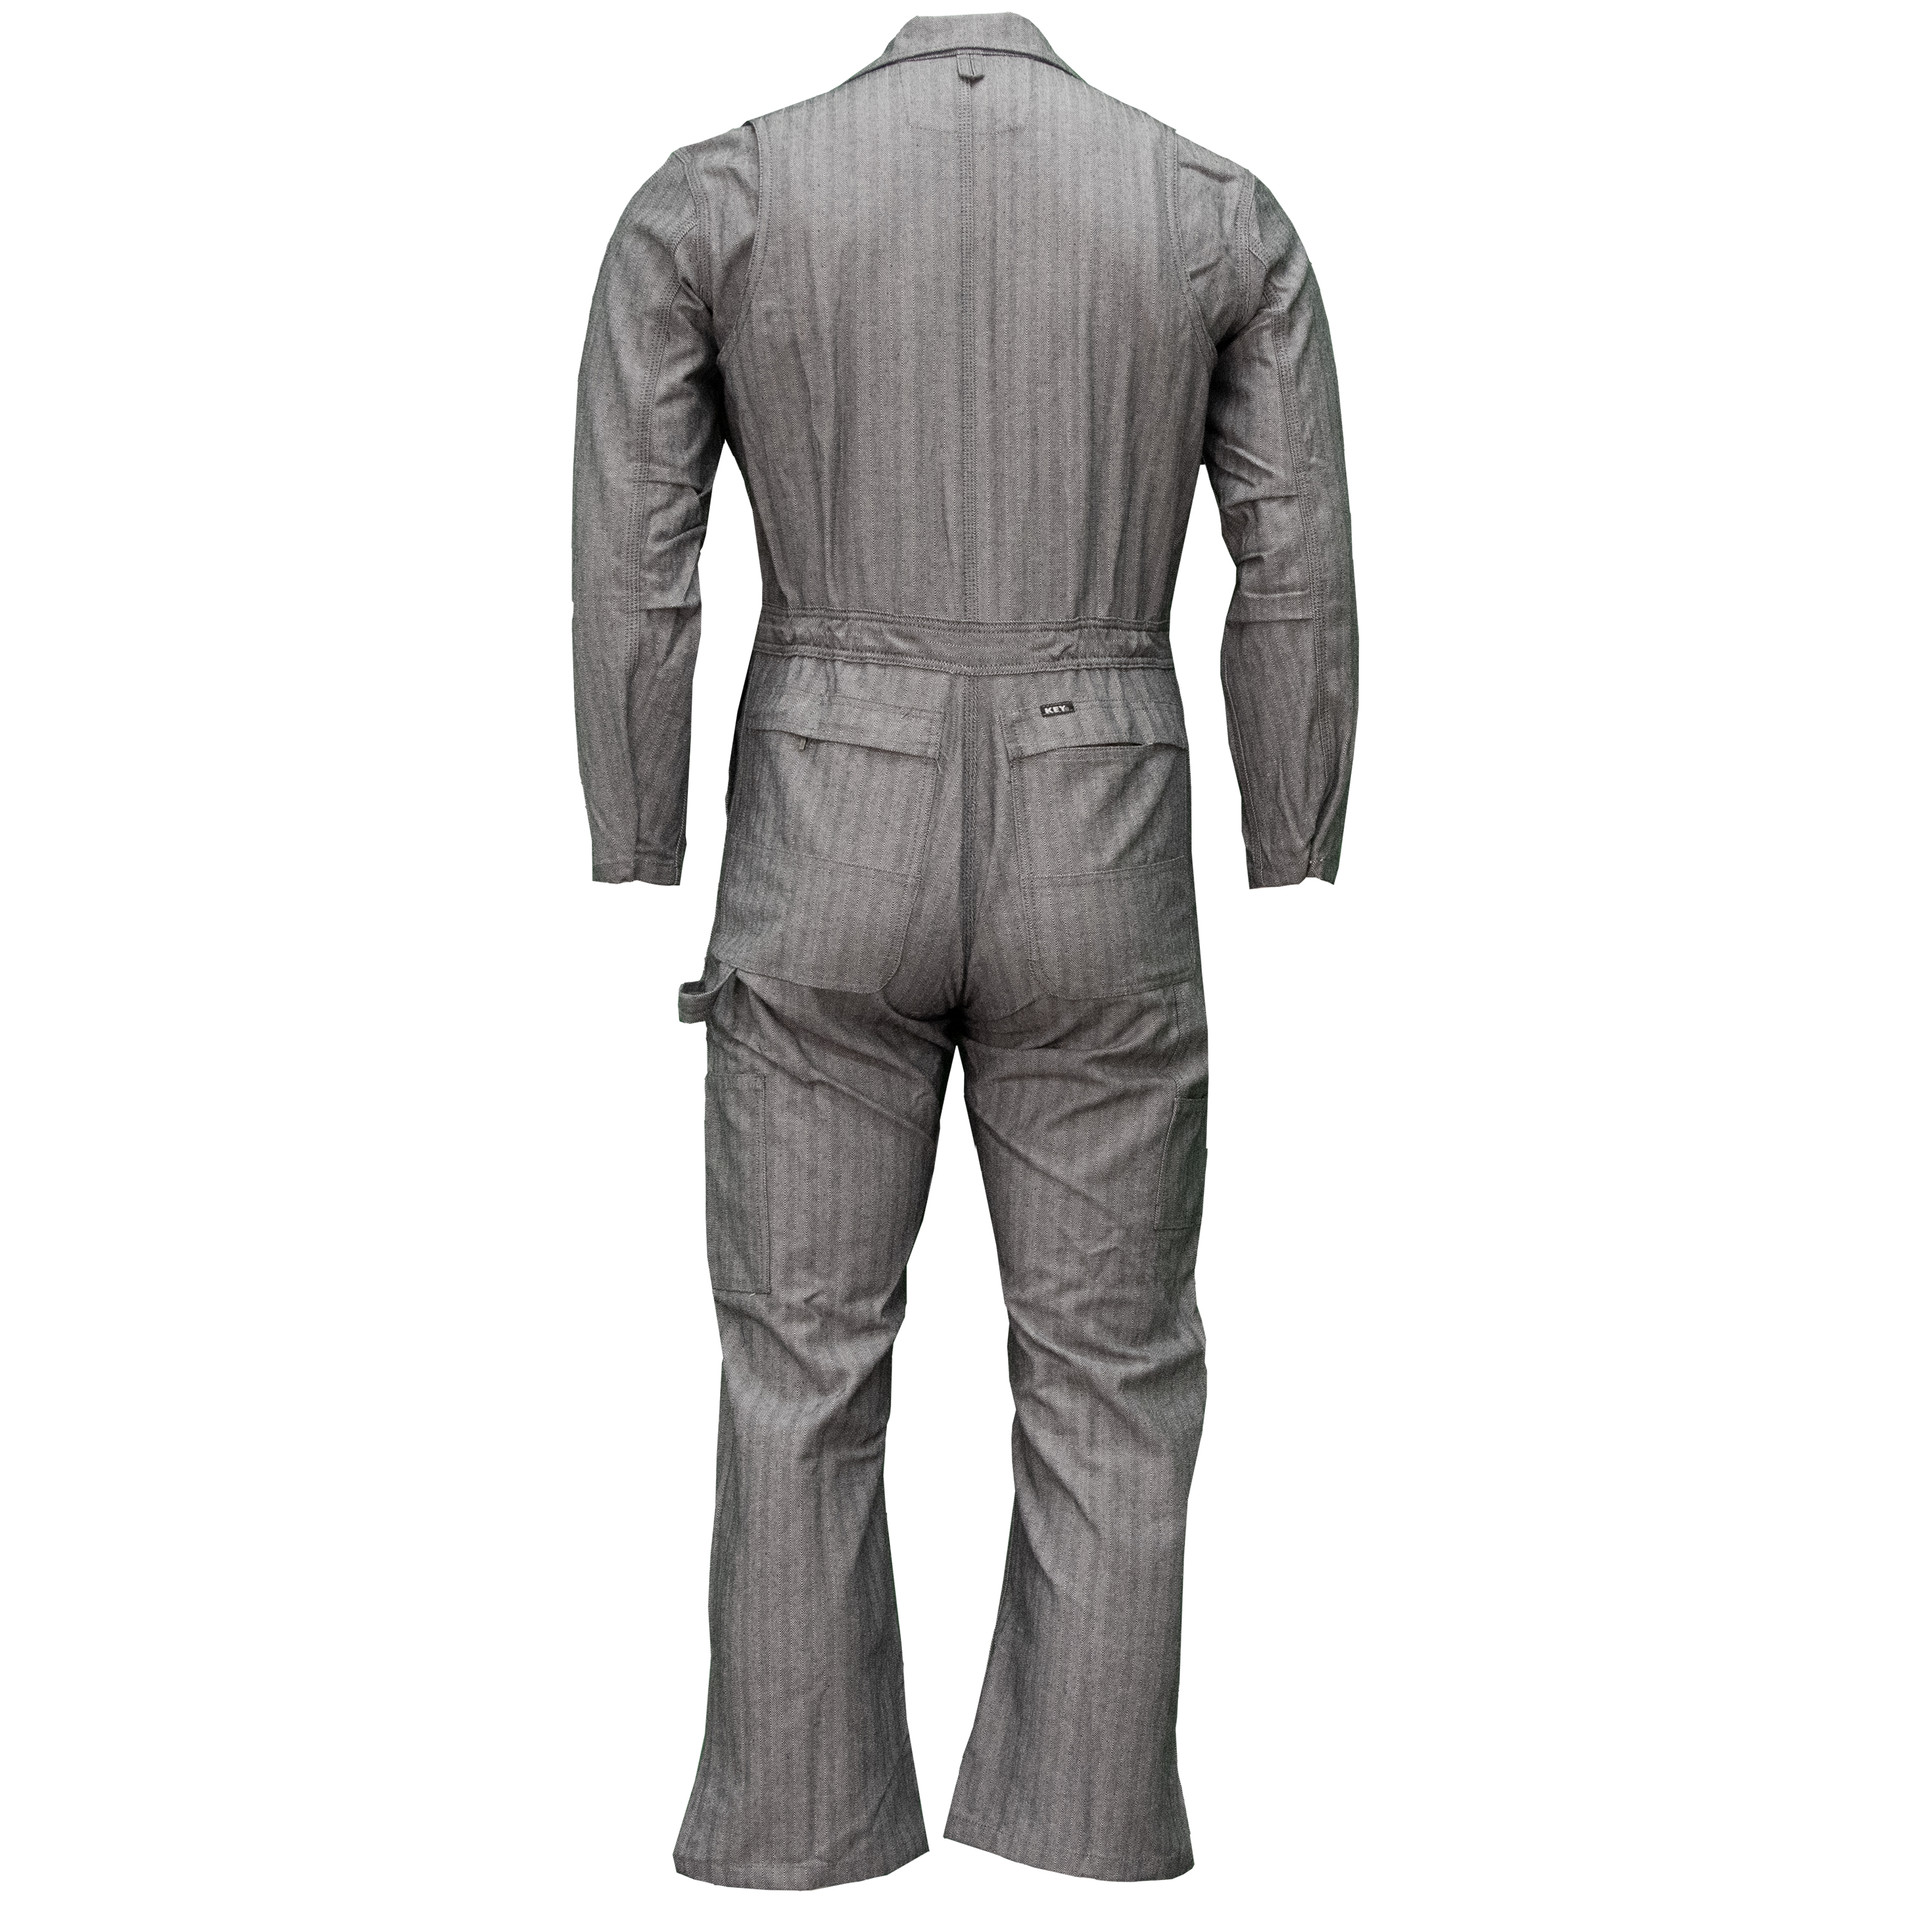 Fisher Stripe Deluxe Unlined Coveralls for Men - KEY Apparel